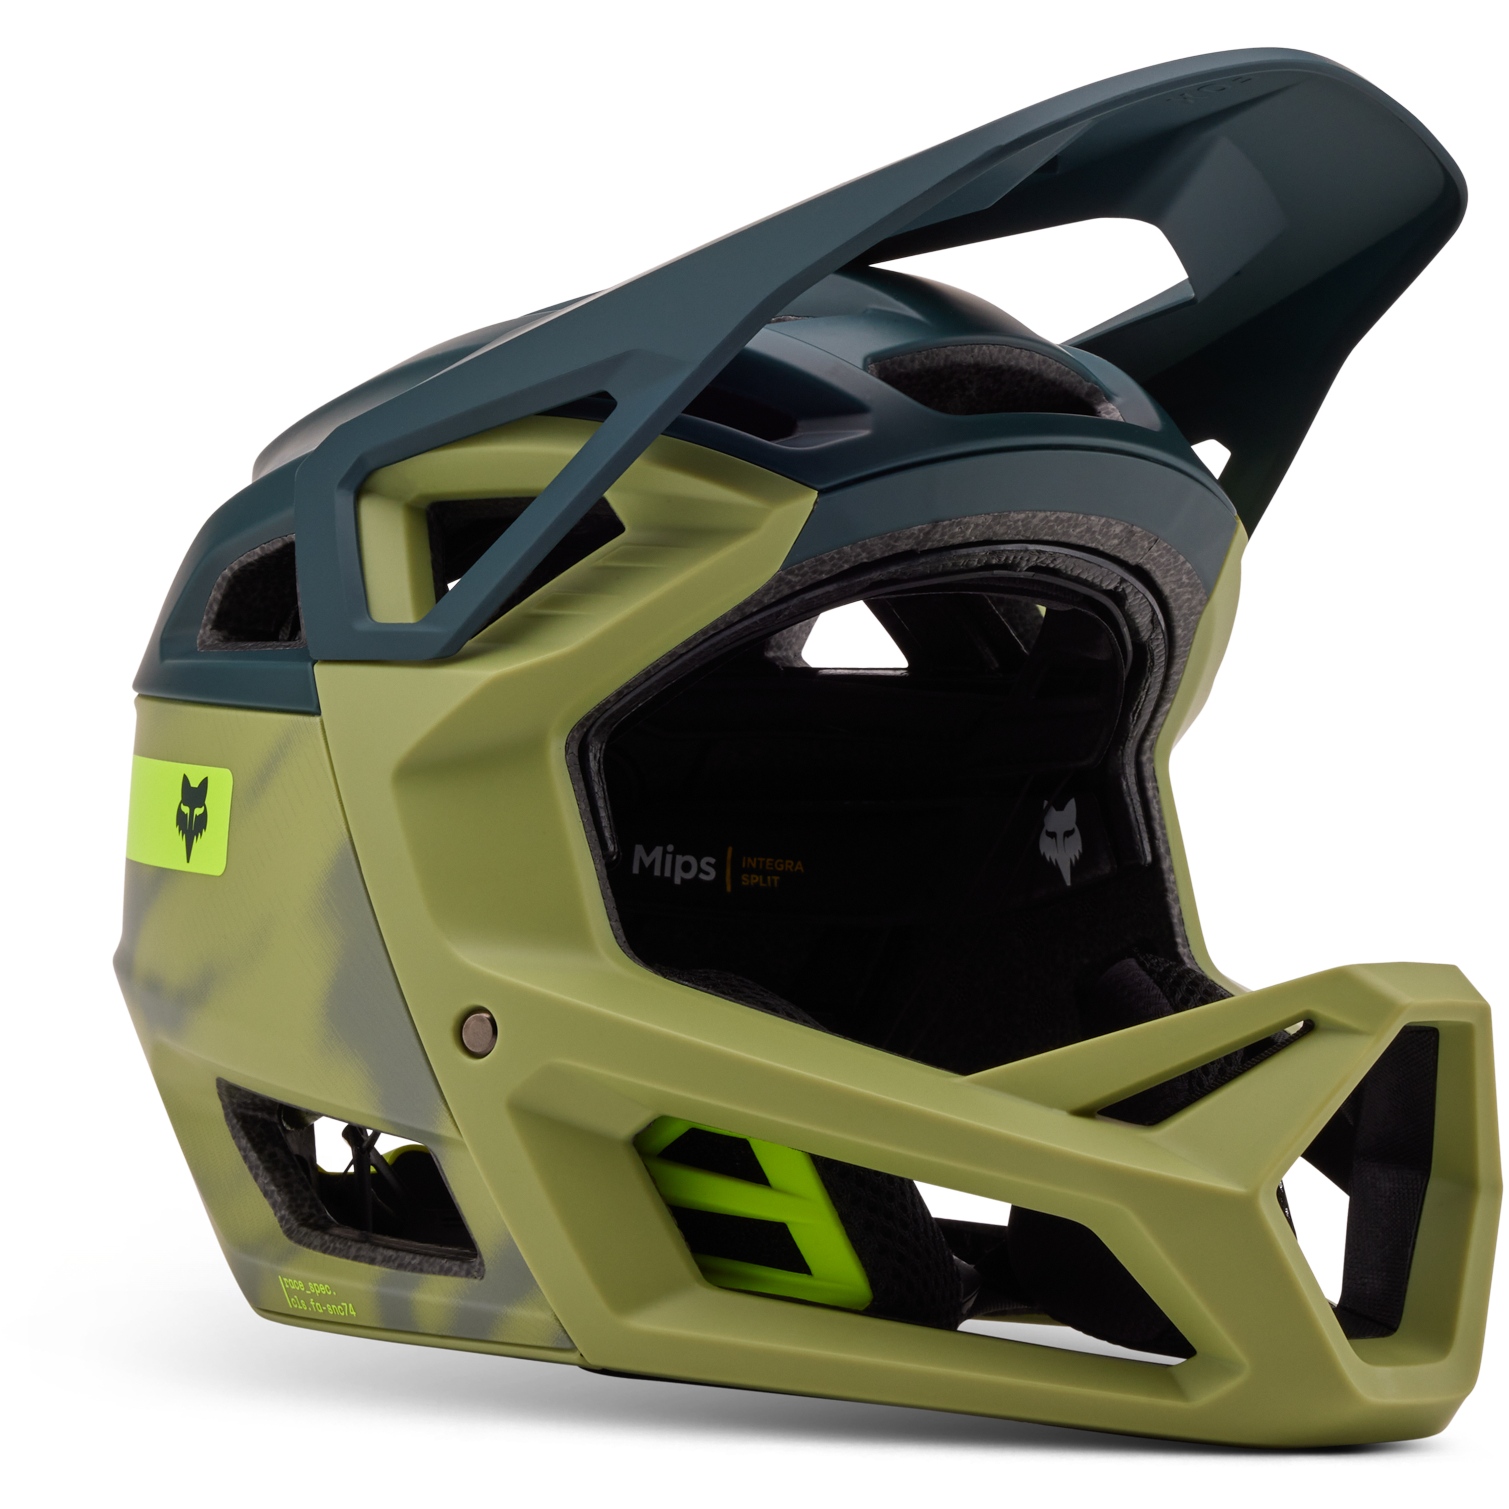 Productfoto van FOX Proframe RS Full Face Helm - Taunt - pale green